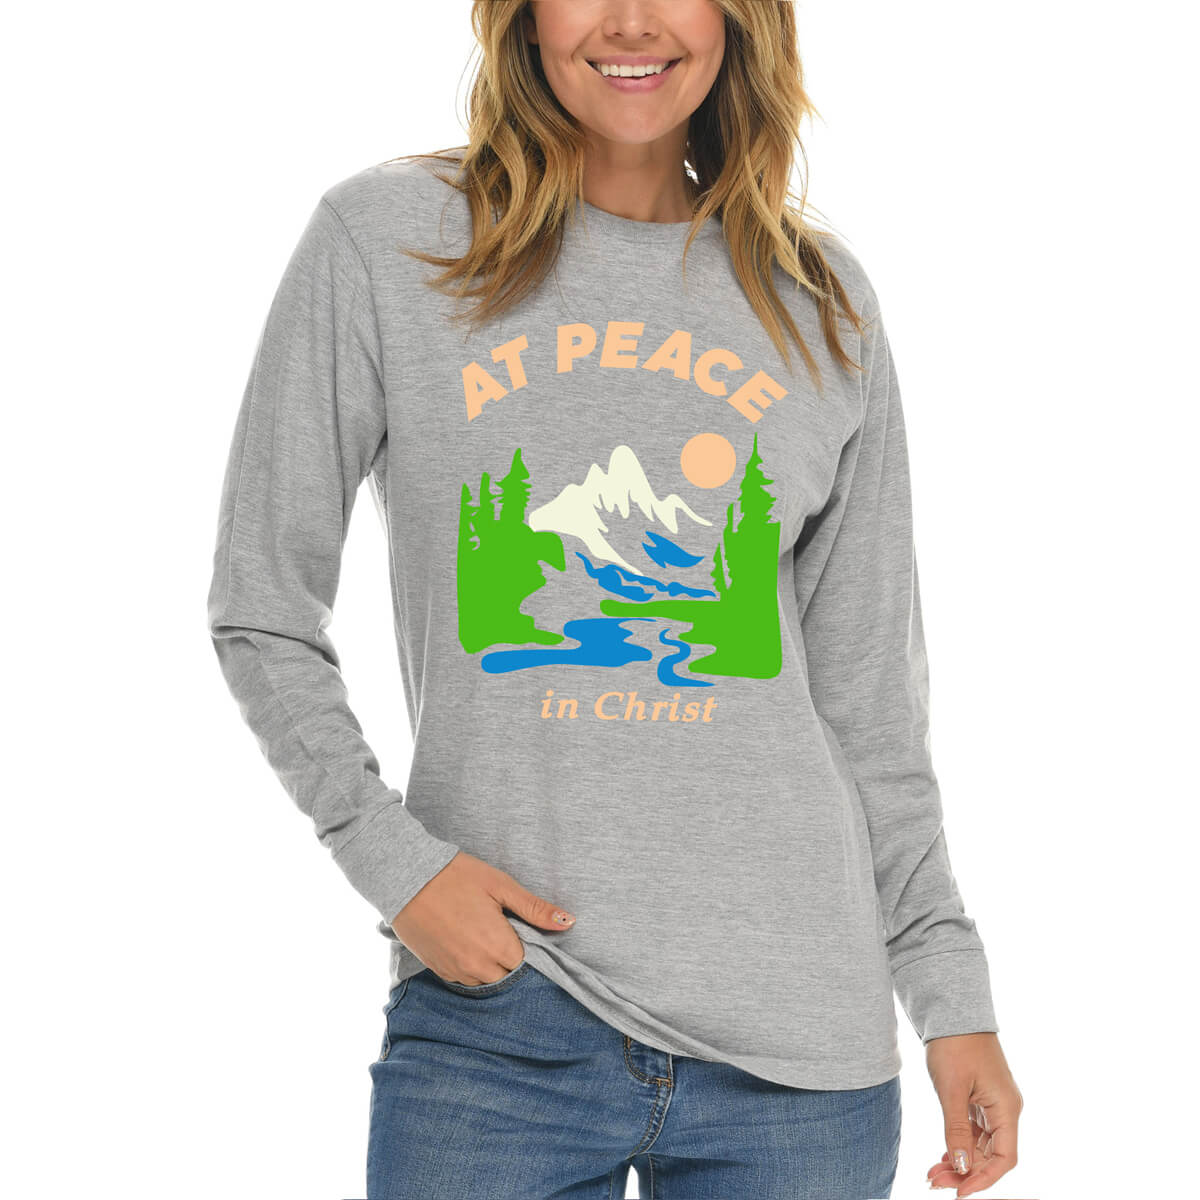 At Peace In Christ Long Sleeve T Shirt